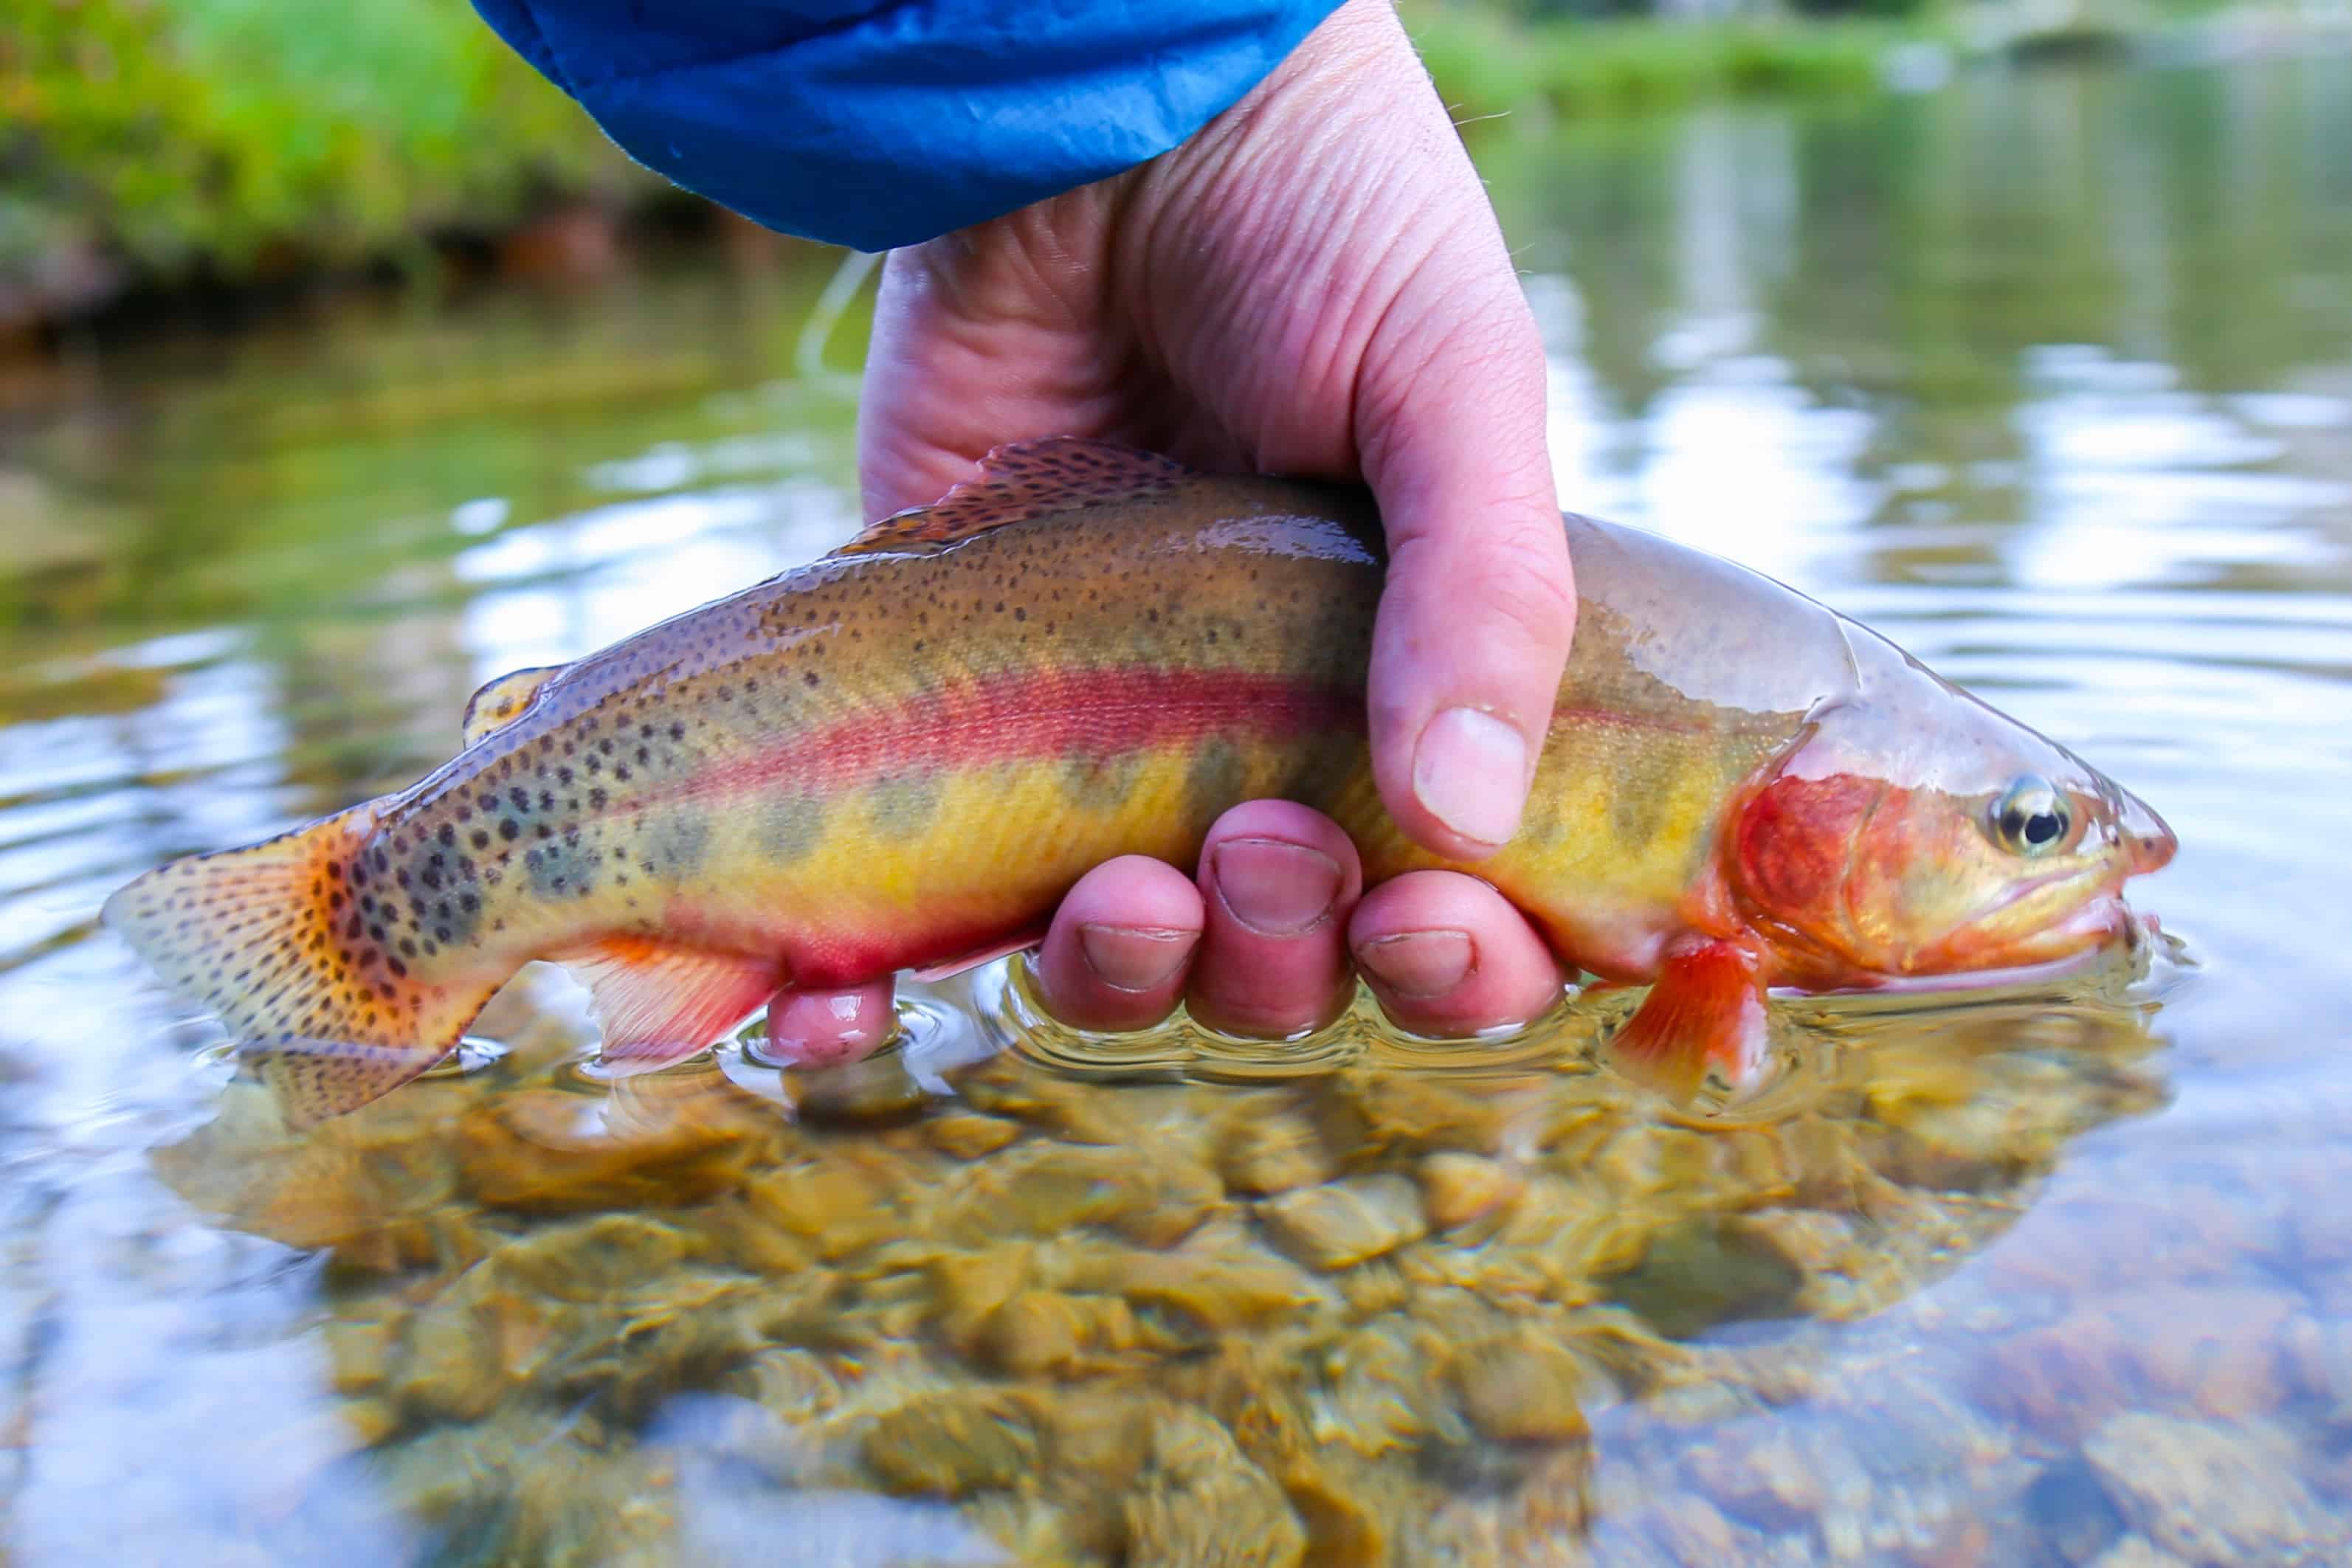 Discover the Official California State Freshwater Fish (And Where You Can Catch Them)